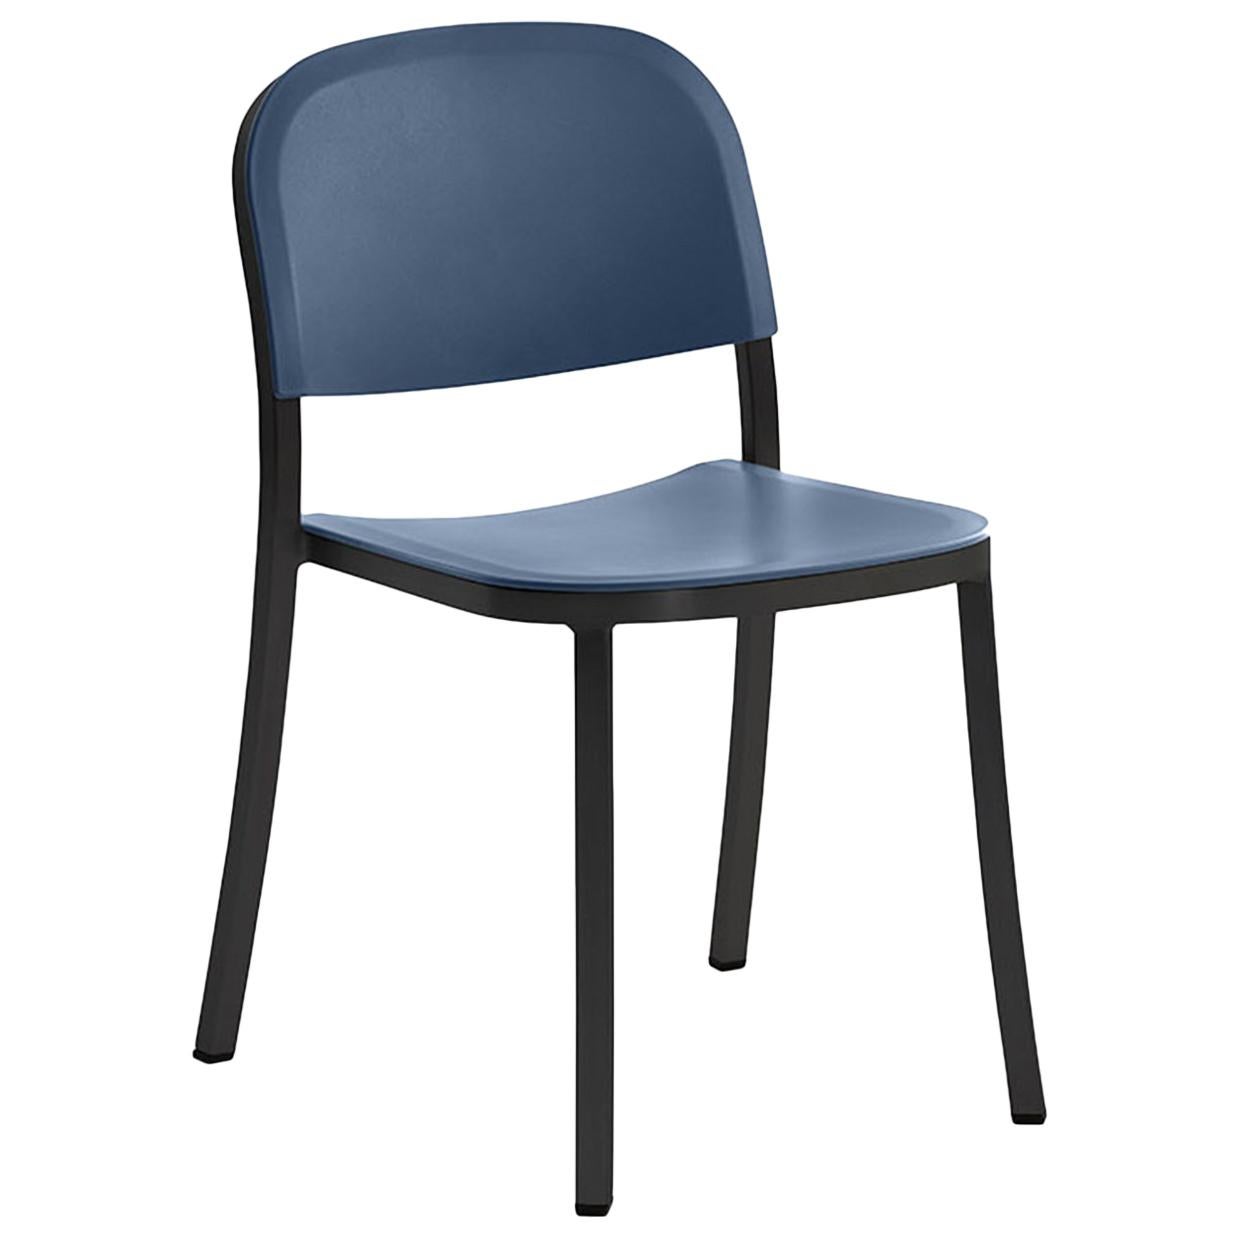 Emeco 1 Inch Stacking Chair in Dark Aluminum and Blue by Jasper Morrison